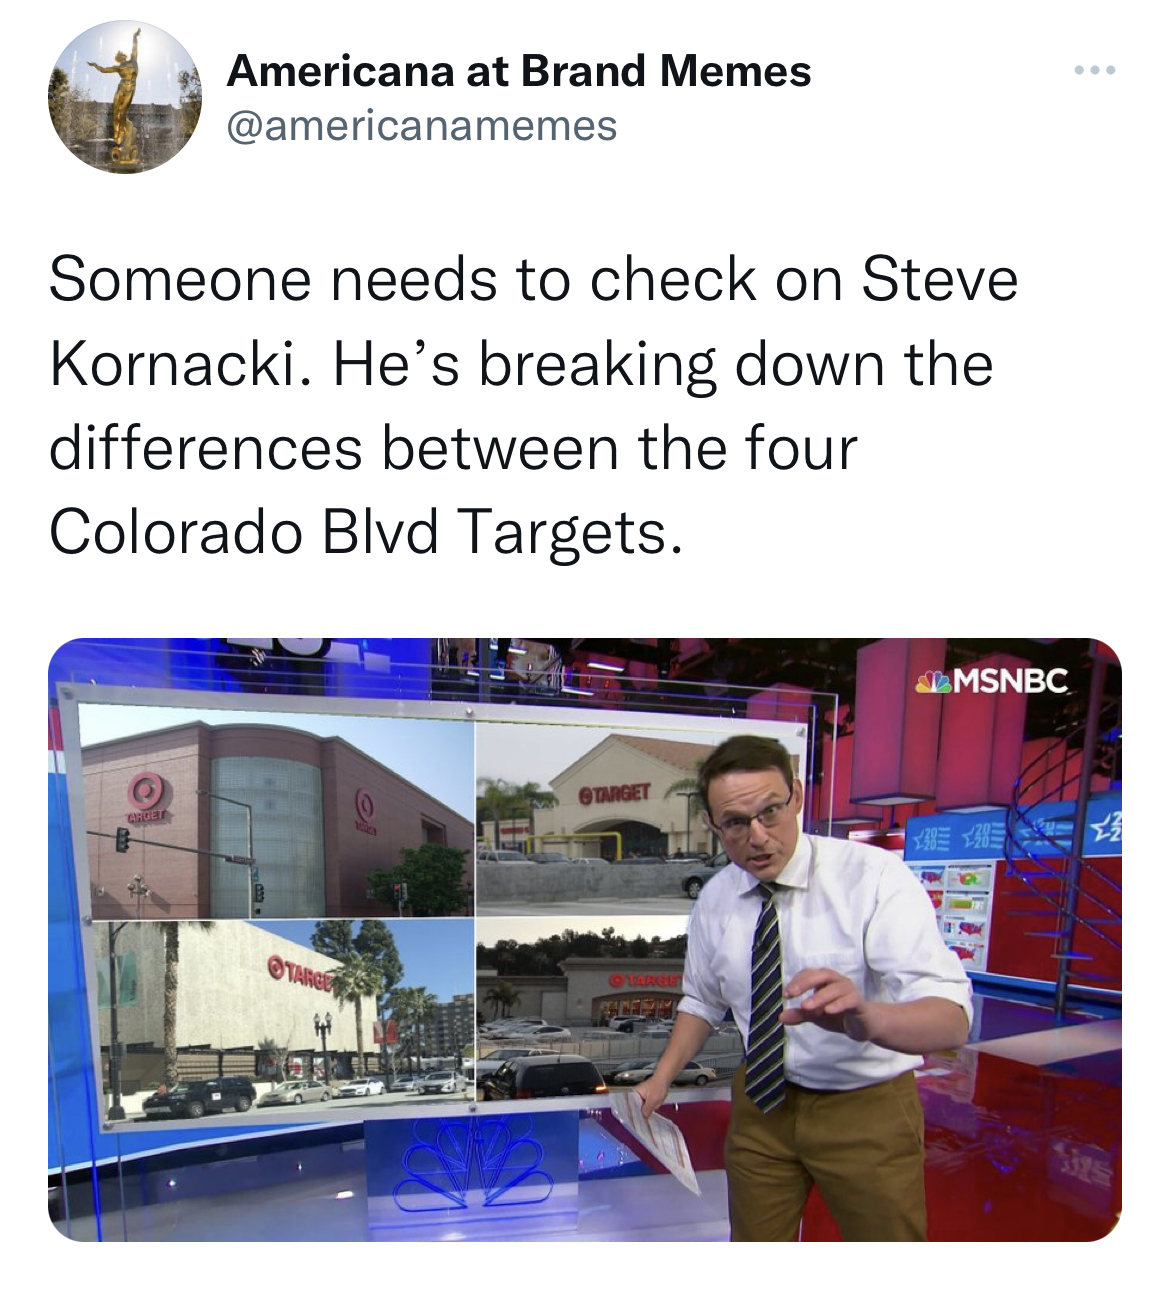 media - Americana at Brand Memes Someone needs to check on Steve Kornacki. He's breaking down the differences between the four Colorado Blvd Targets. Msnbc 3